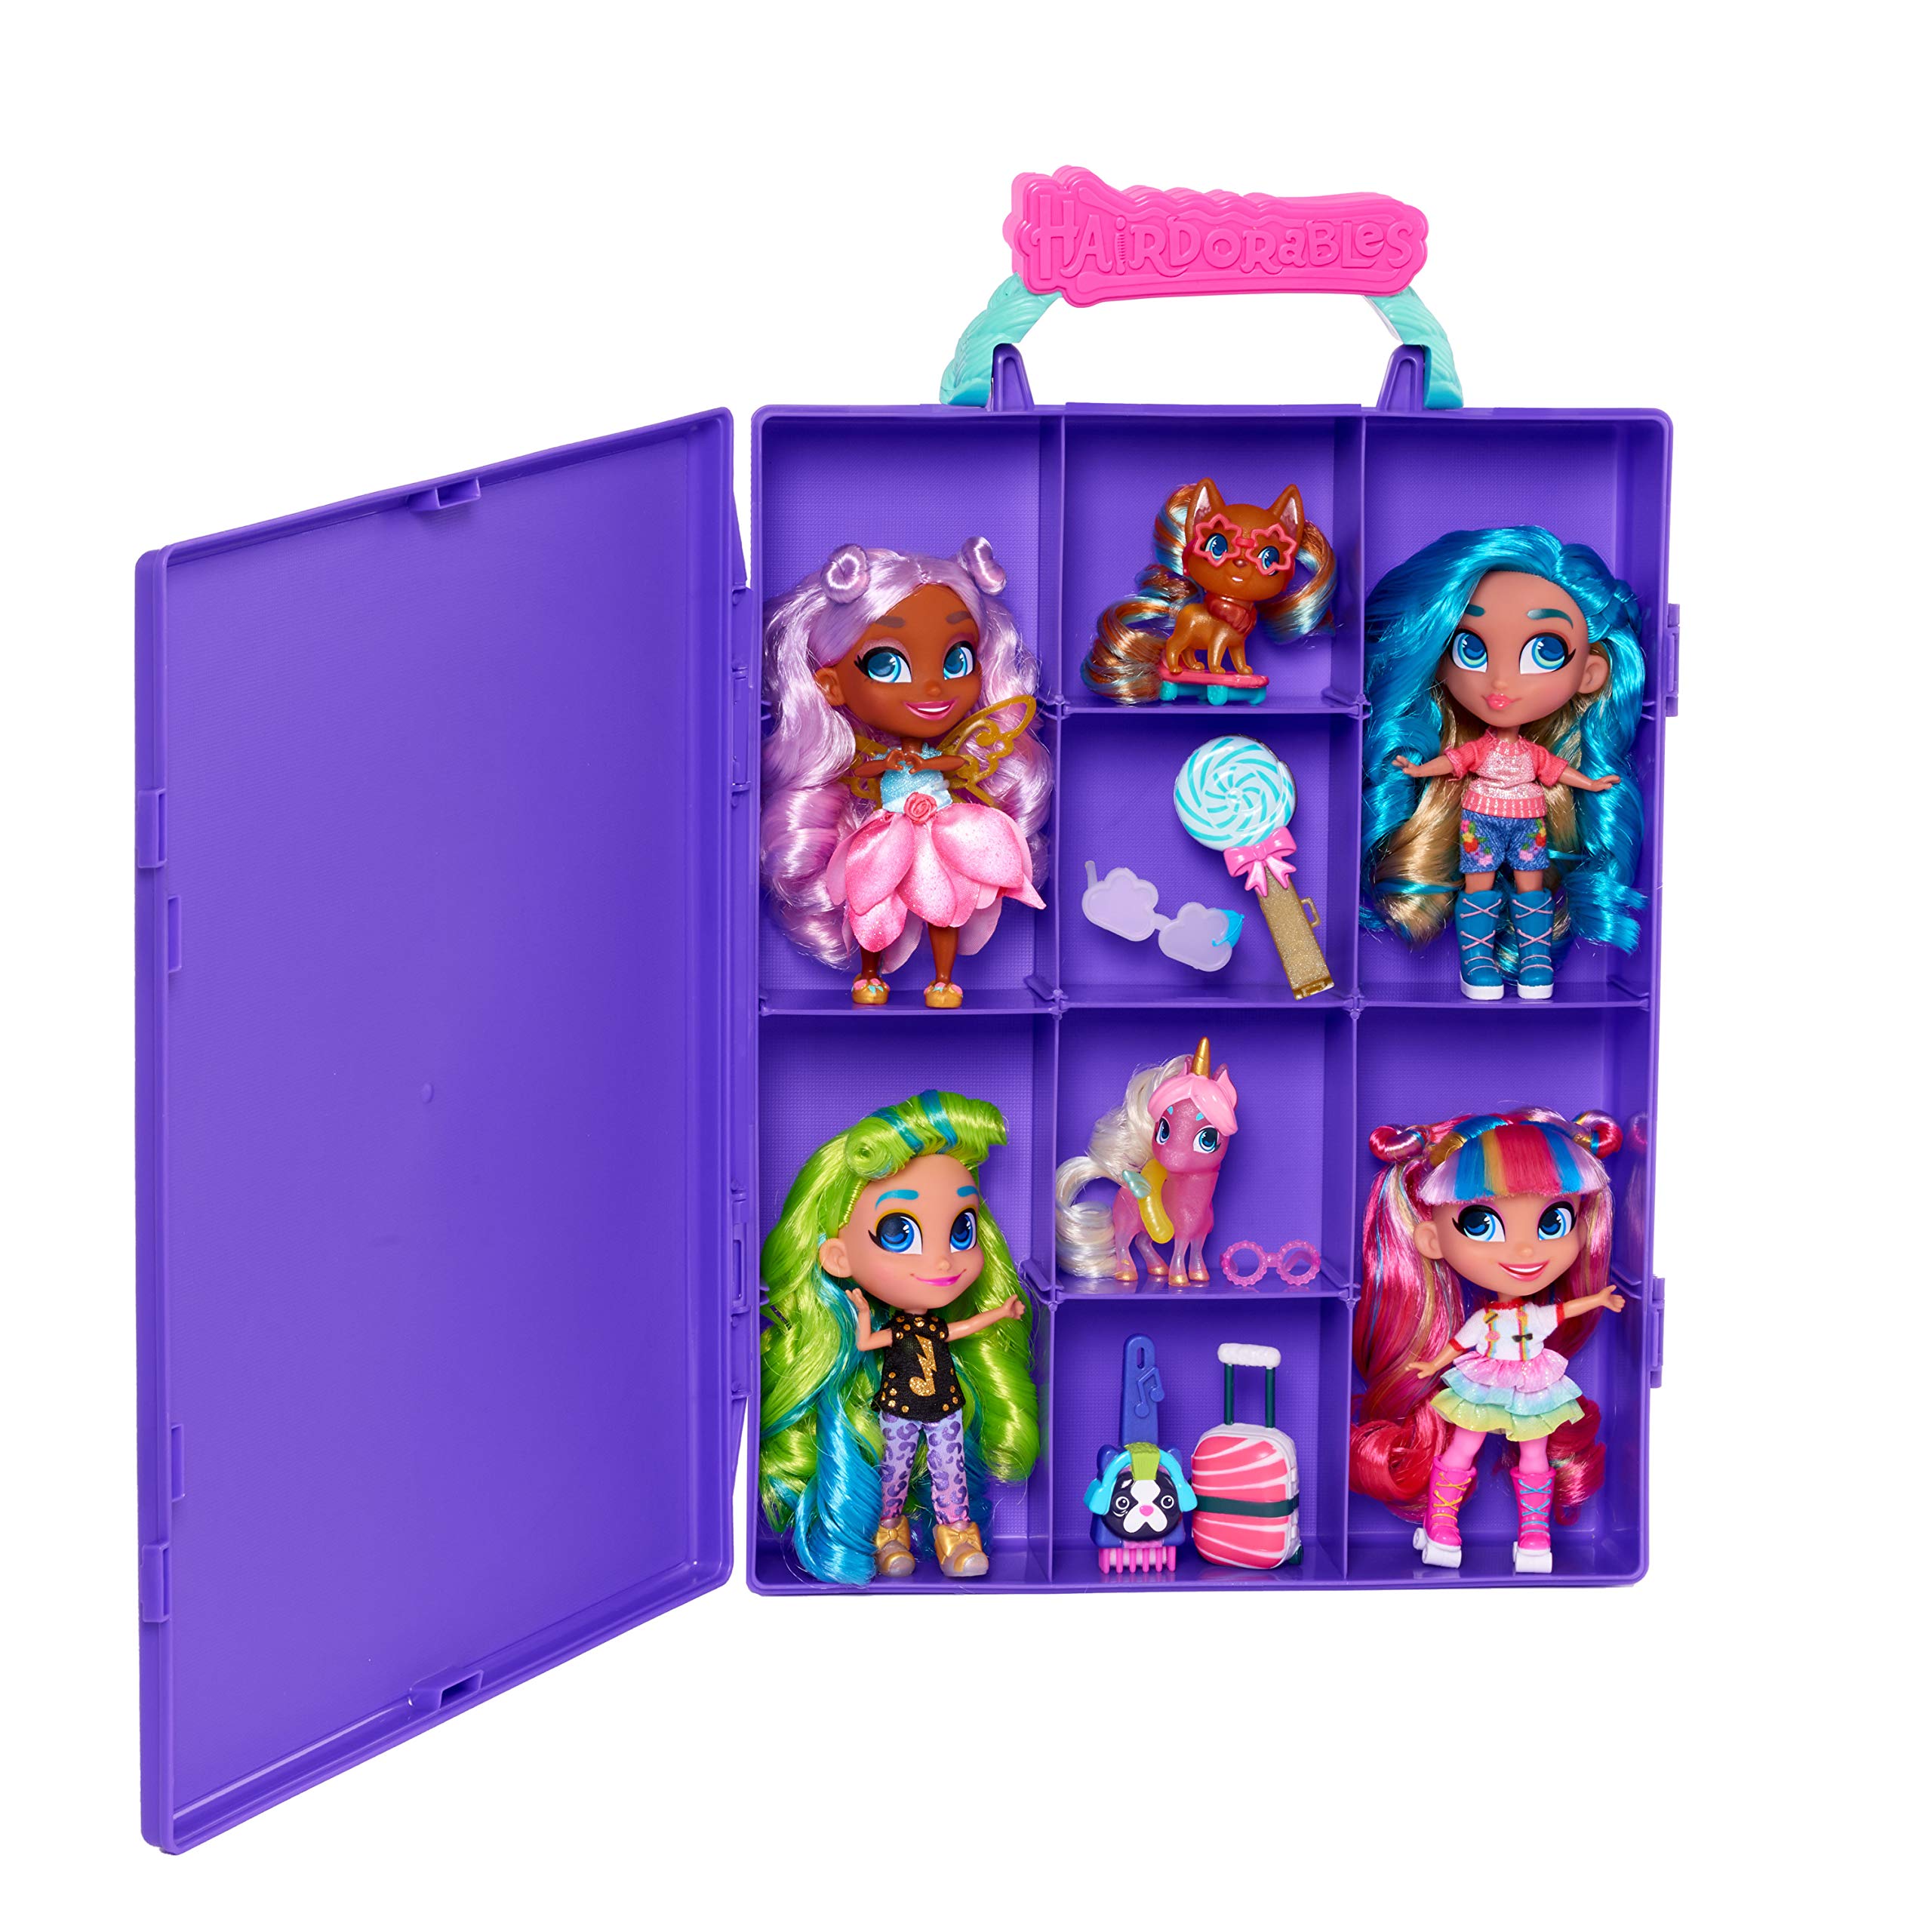 Hairdorables Storage Case, Kids Toys for Ages 3 Up, Gifts and Presents by Just Play